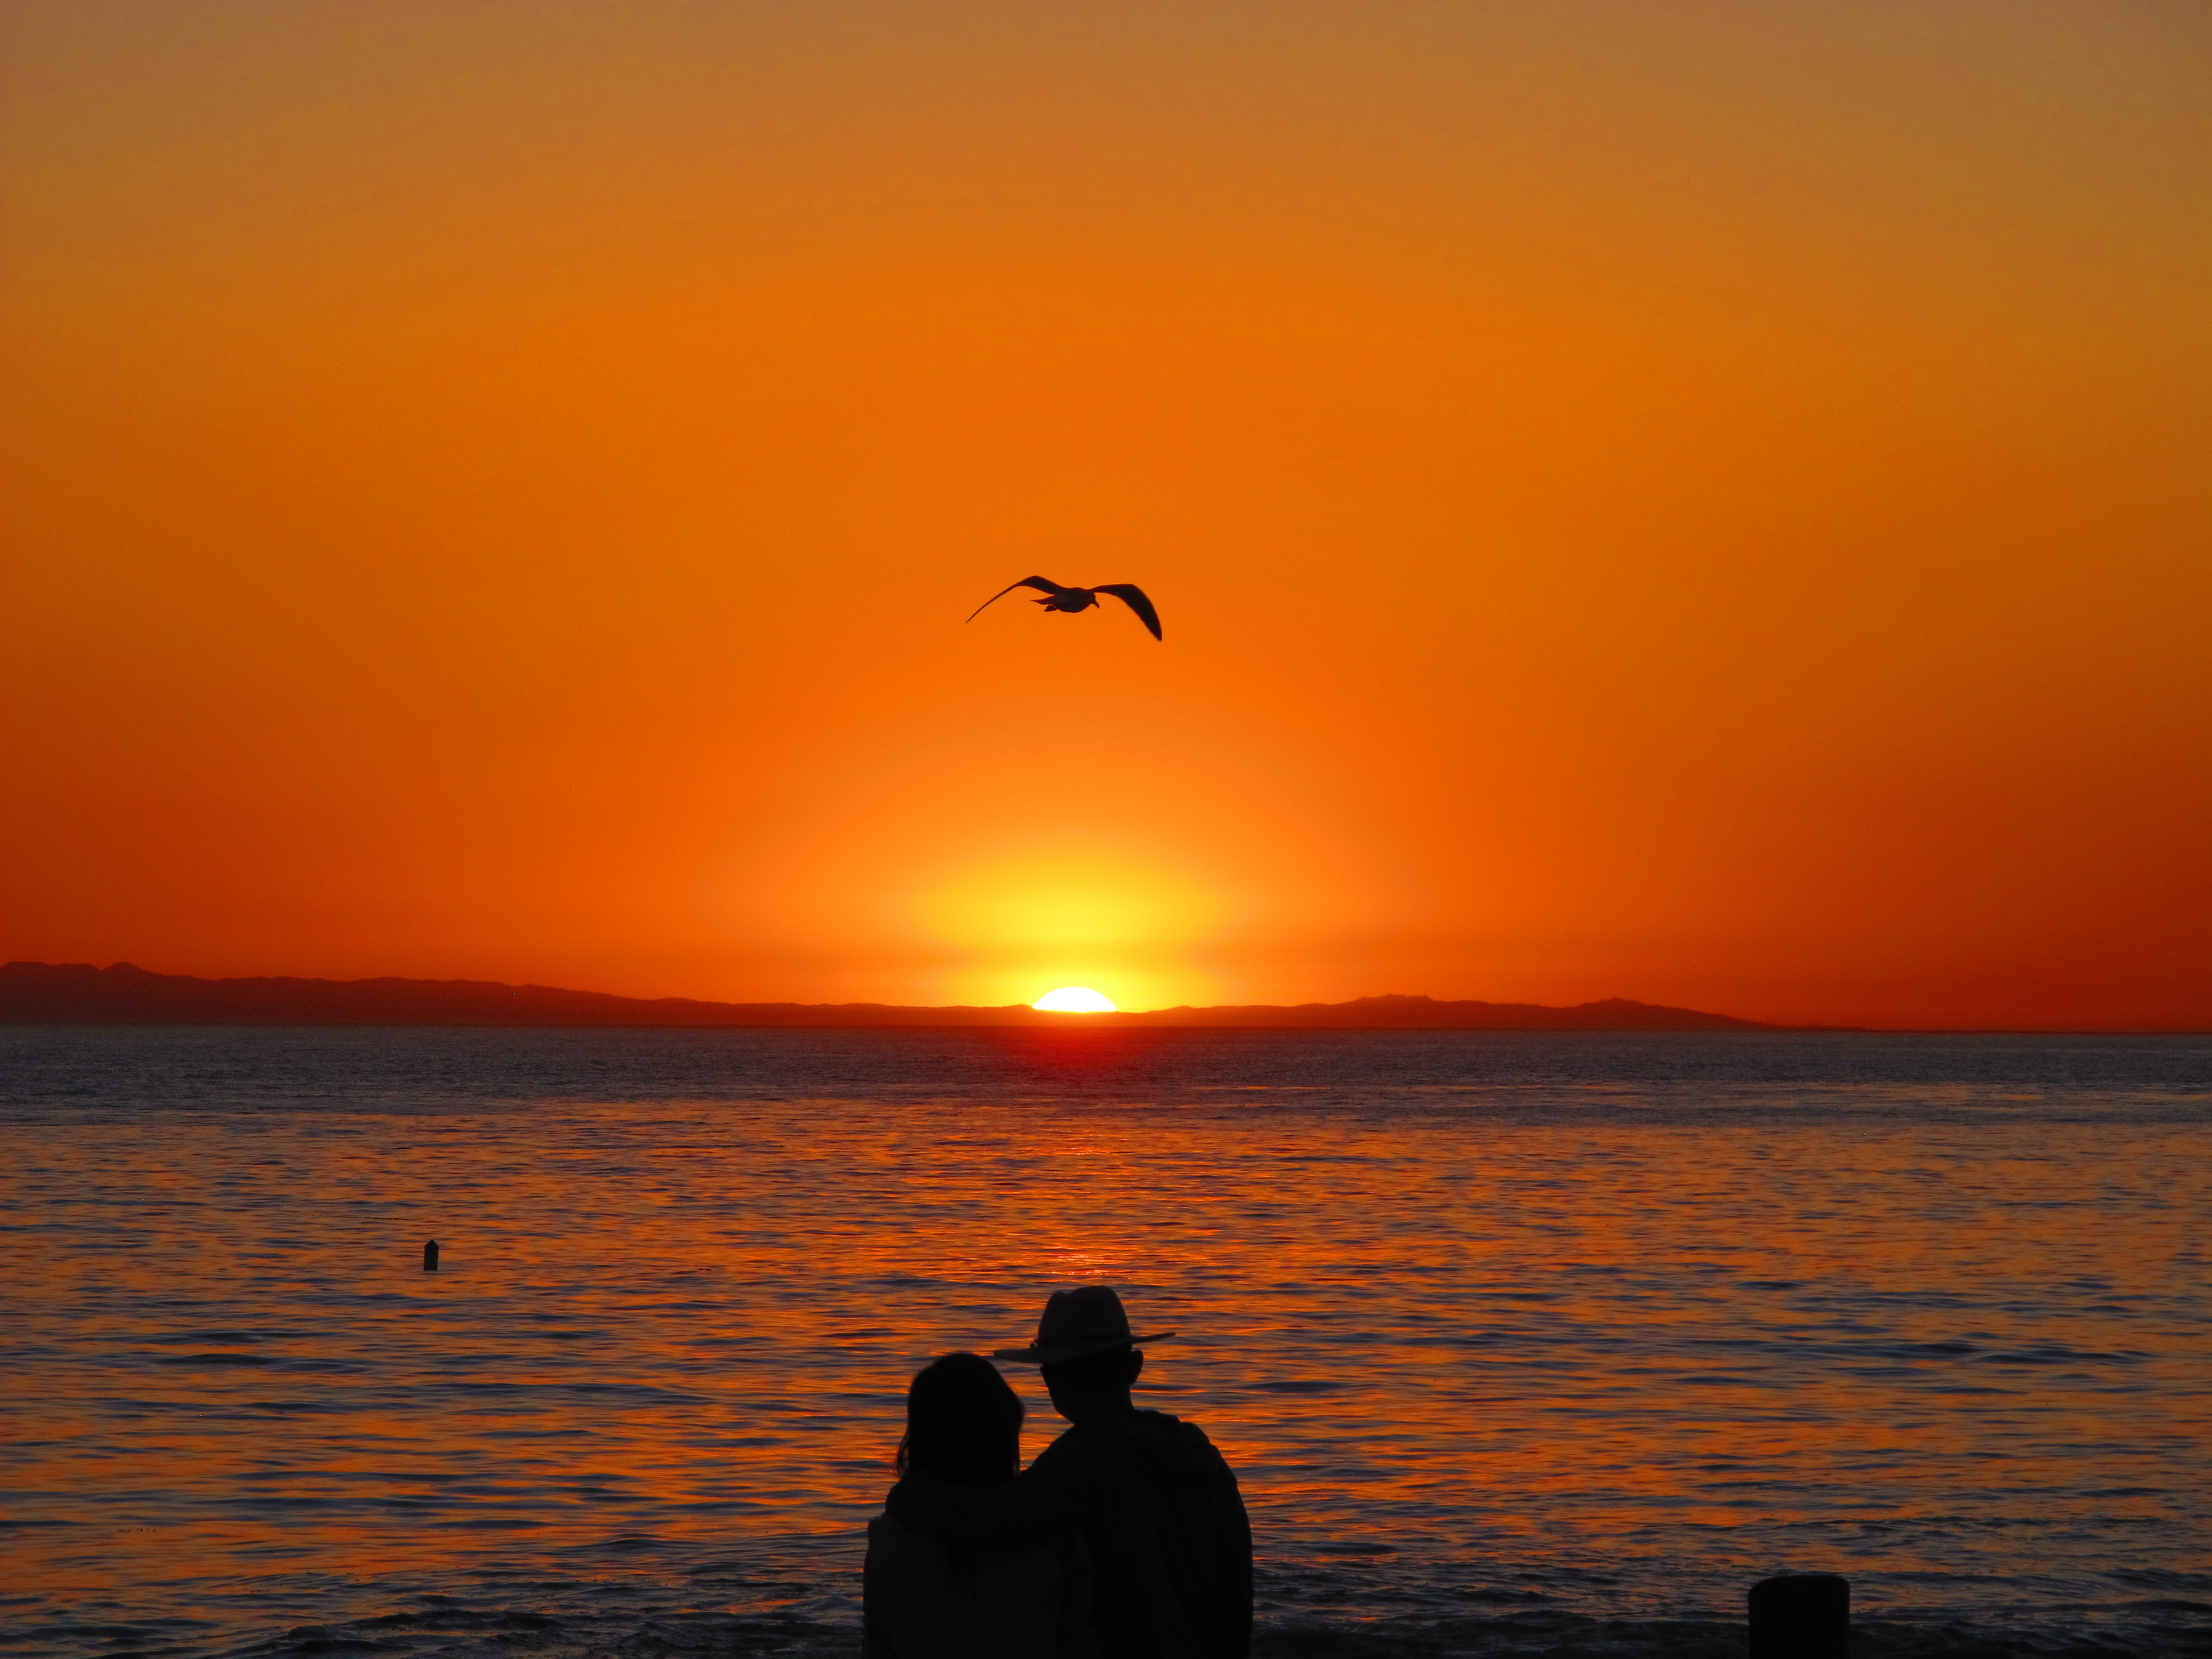 Sunest Seagull and couple - photo by BTVG